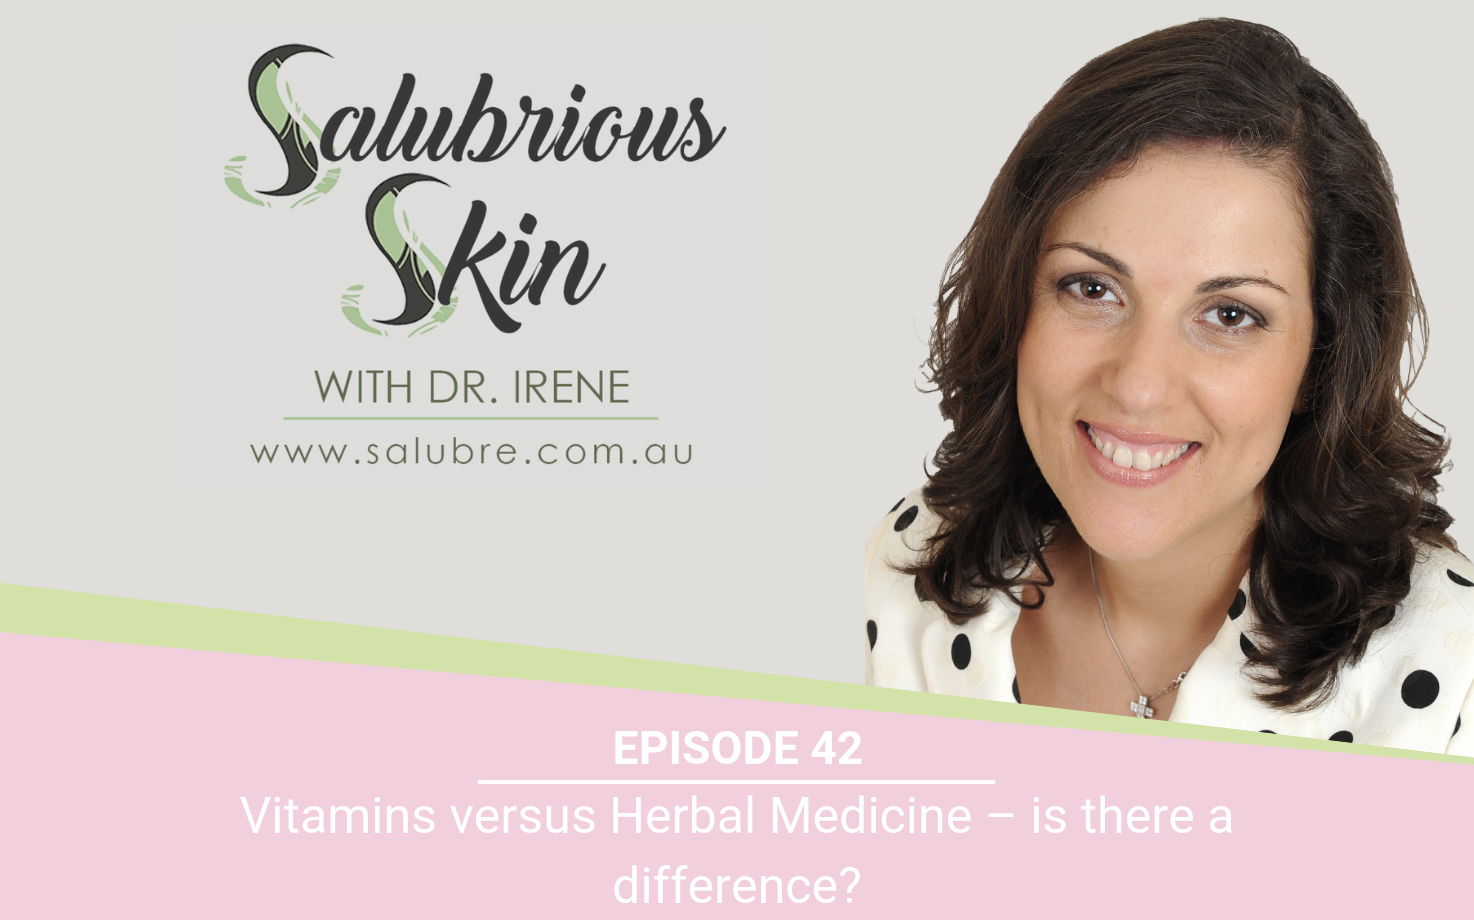 Podcast 42: What makes a skincare product effective?